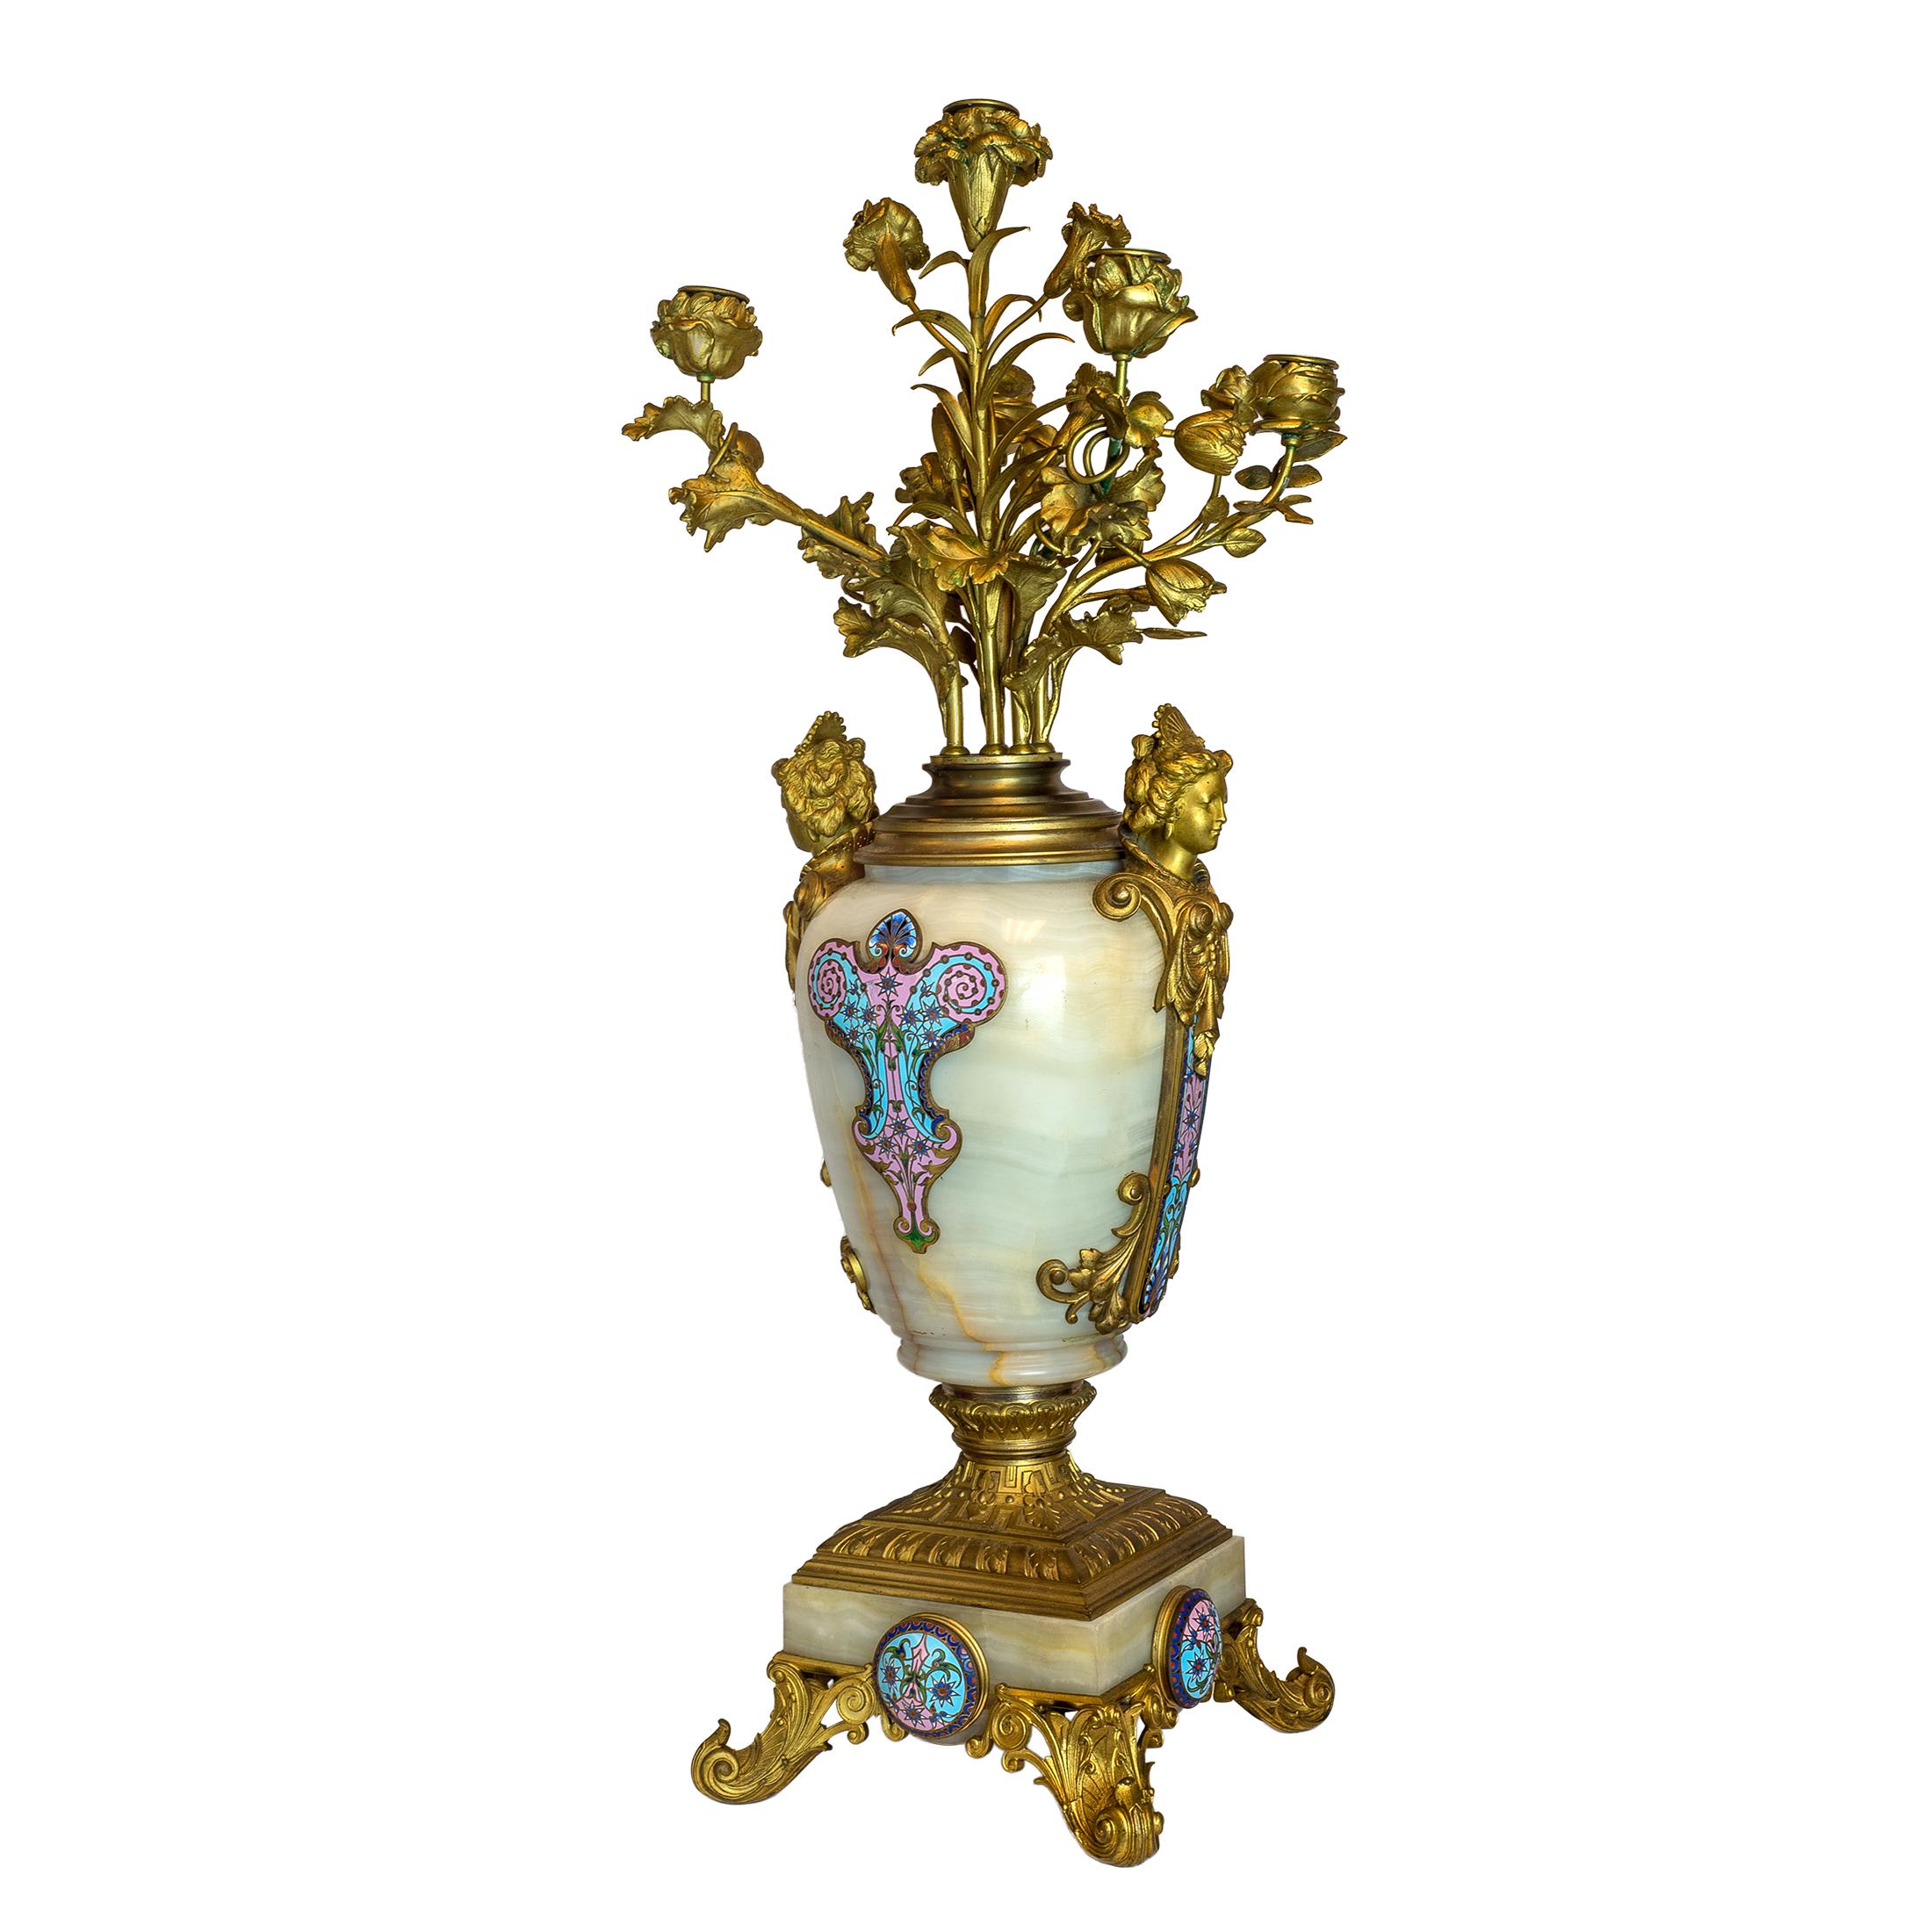 Exquisite pair of ormolu-mounted 5-light onyx vase candelabras and a pair of French ormolu and champlevé enamel-mounted Onyx pedestals, each of column form with ionic capital and square plinth.

Date: 19th century
Origin: French
Dimension: